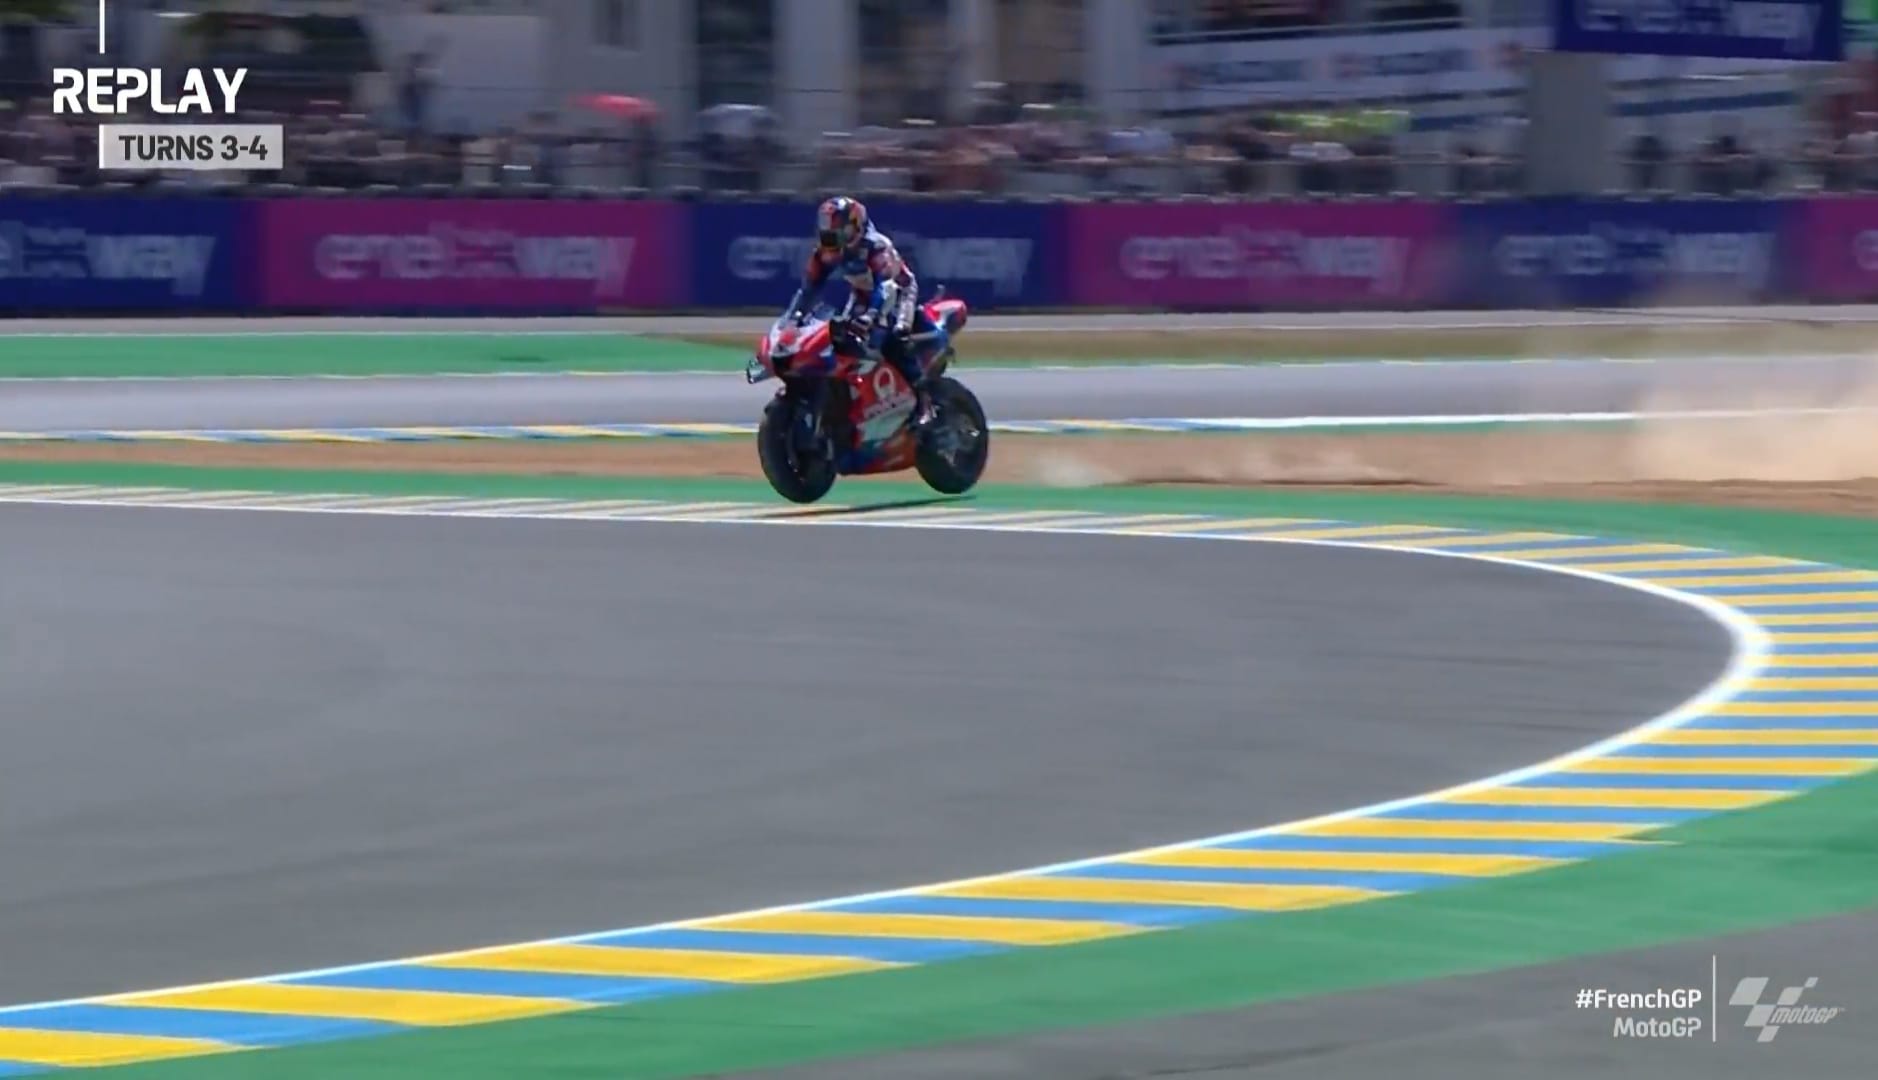 MotoGP France Le Mans: When Johann Zarco comments on his rescue with a lot of humor